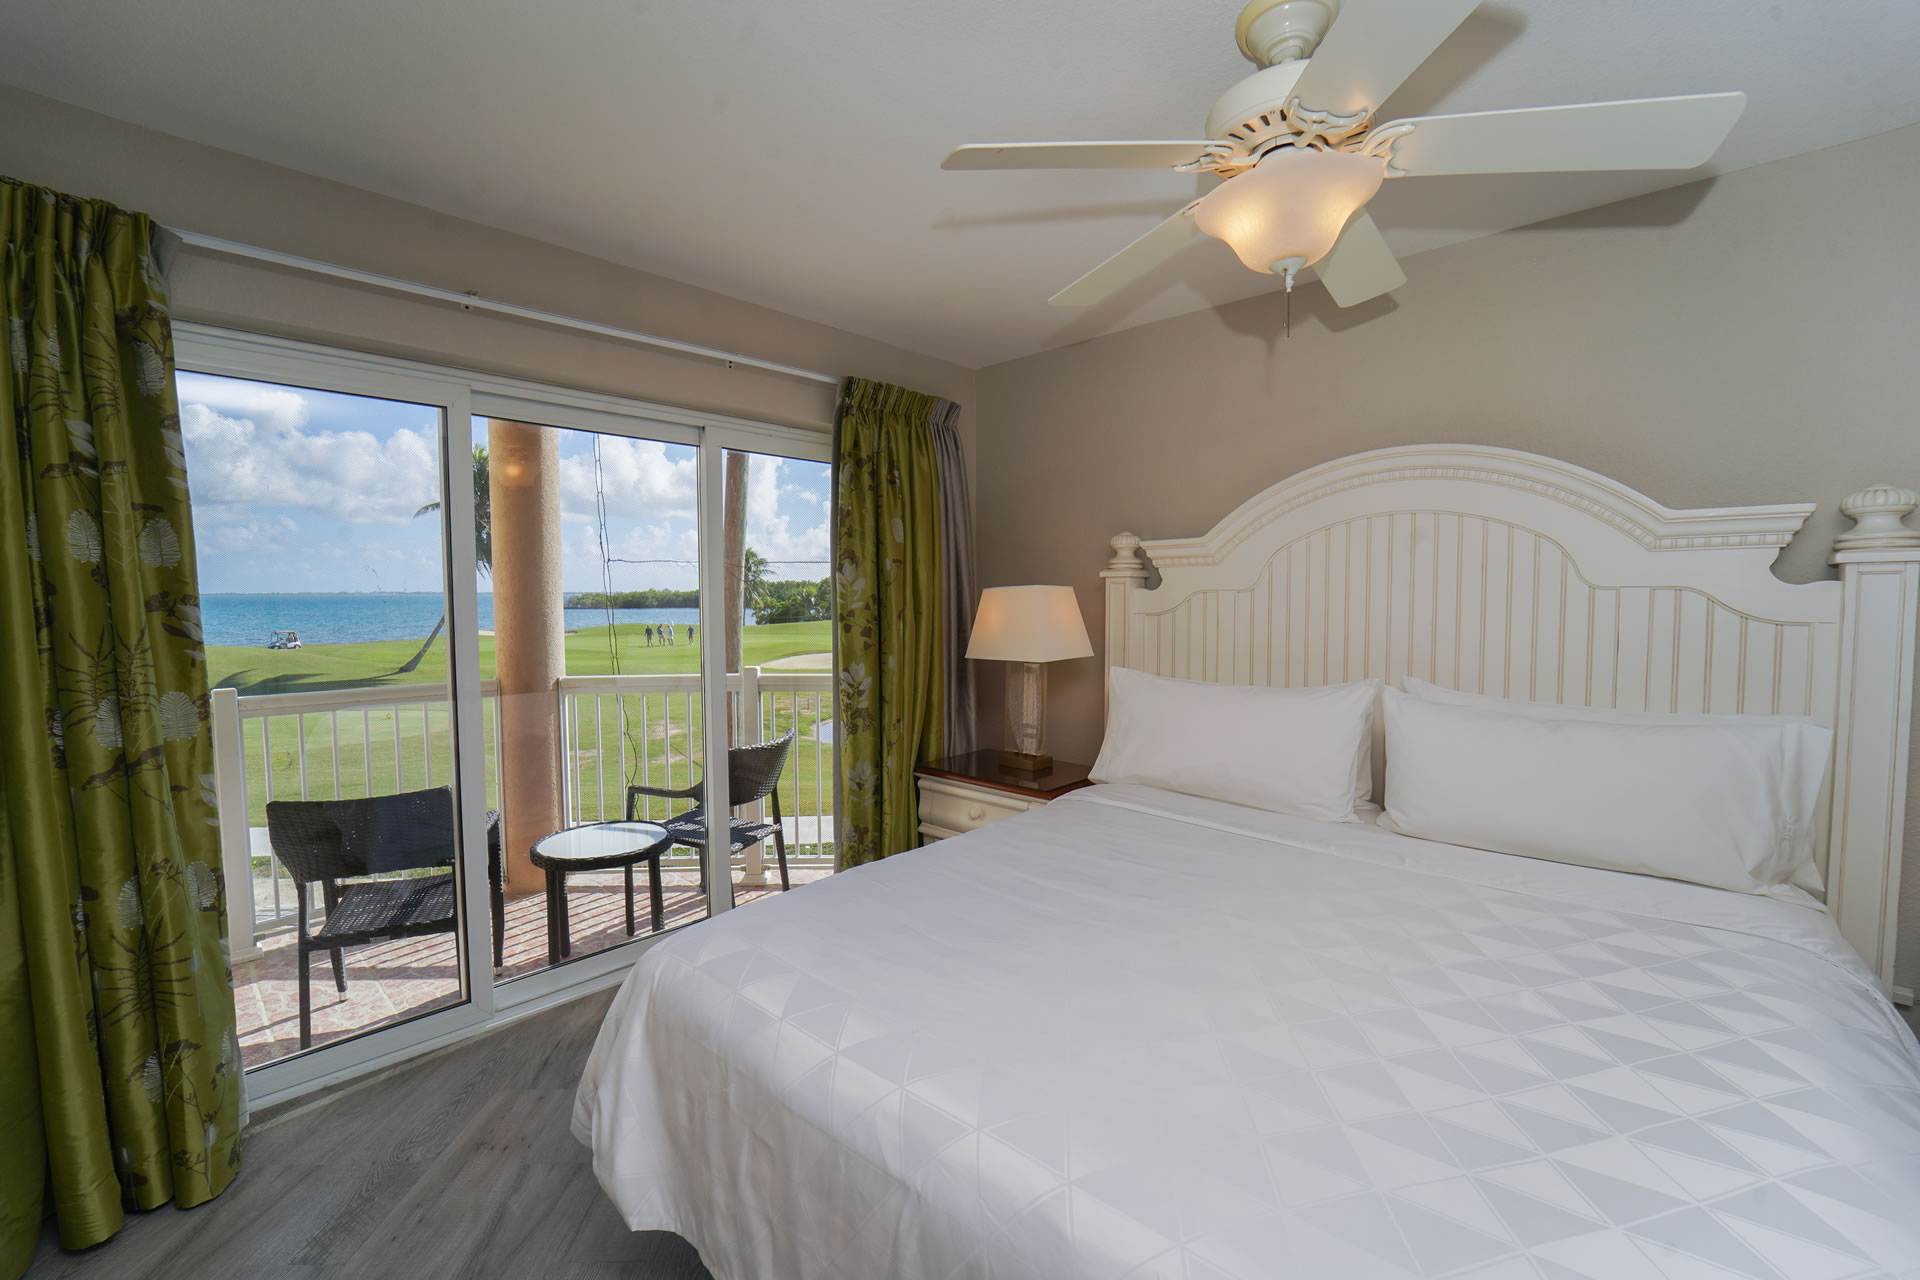 Guest room bed at Grand Caymanian Resort.